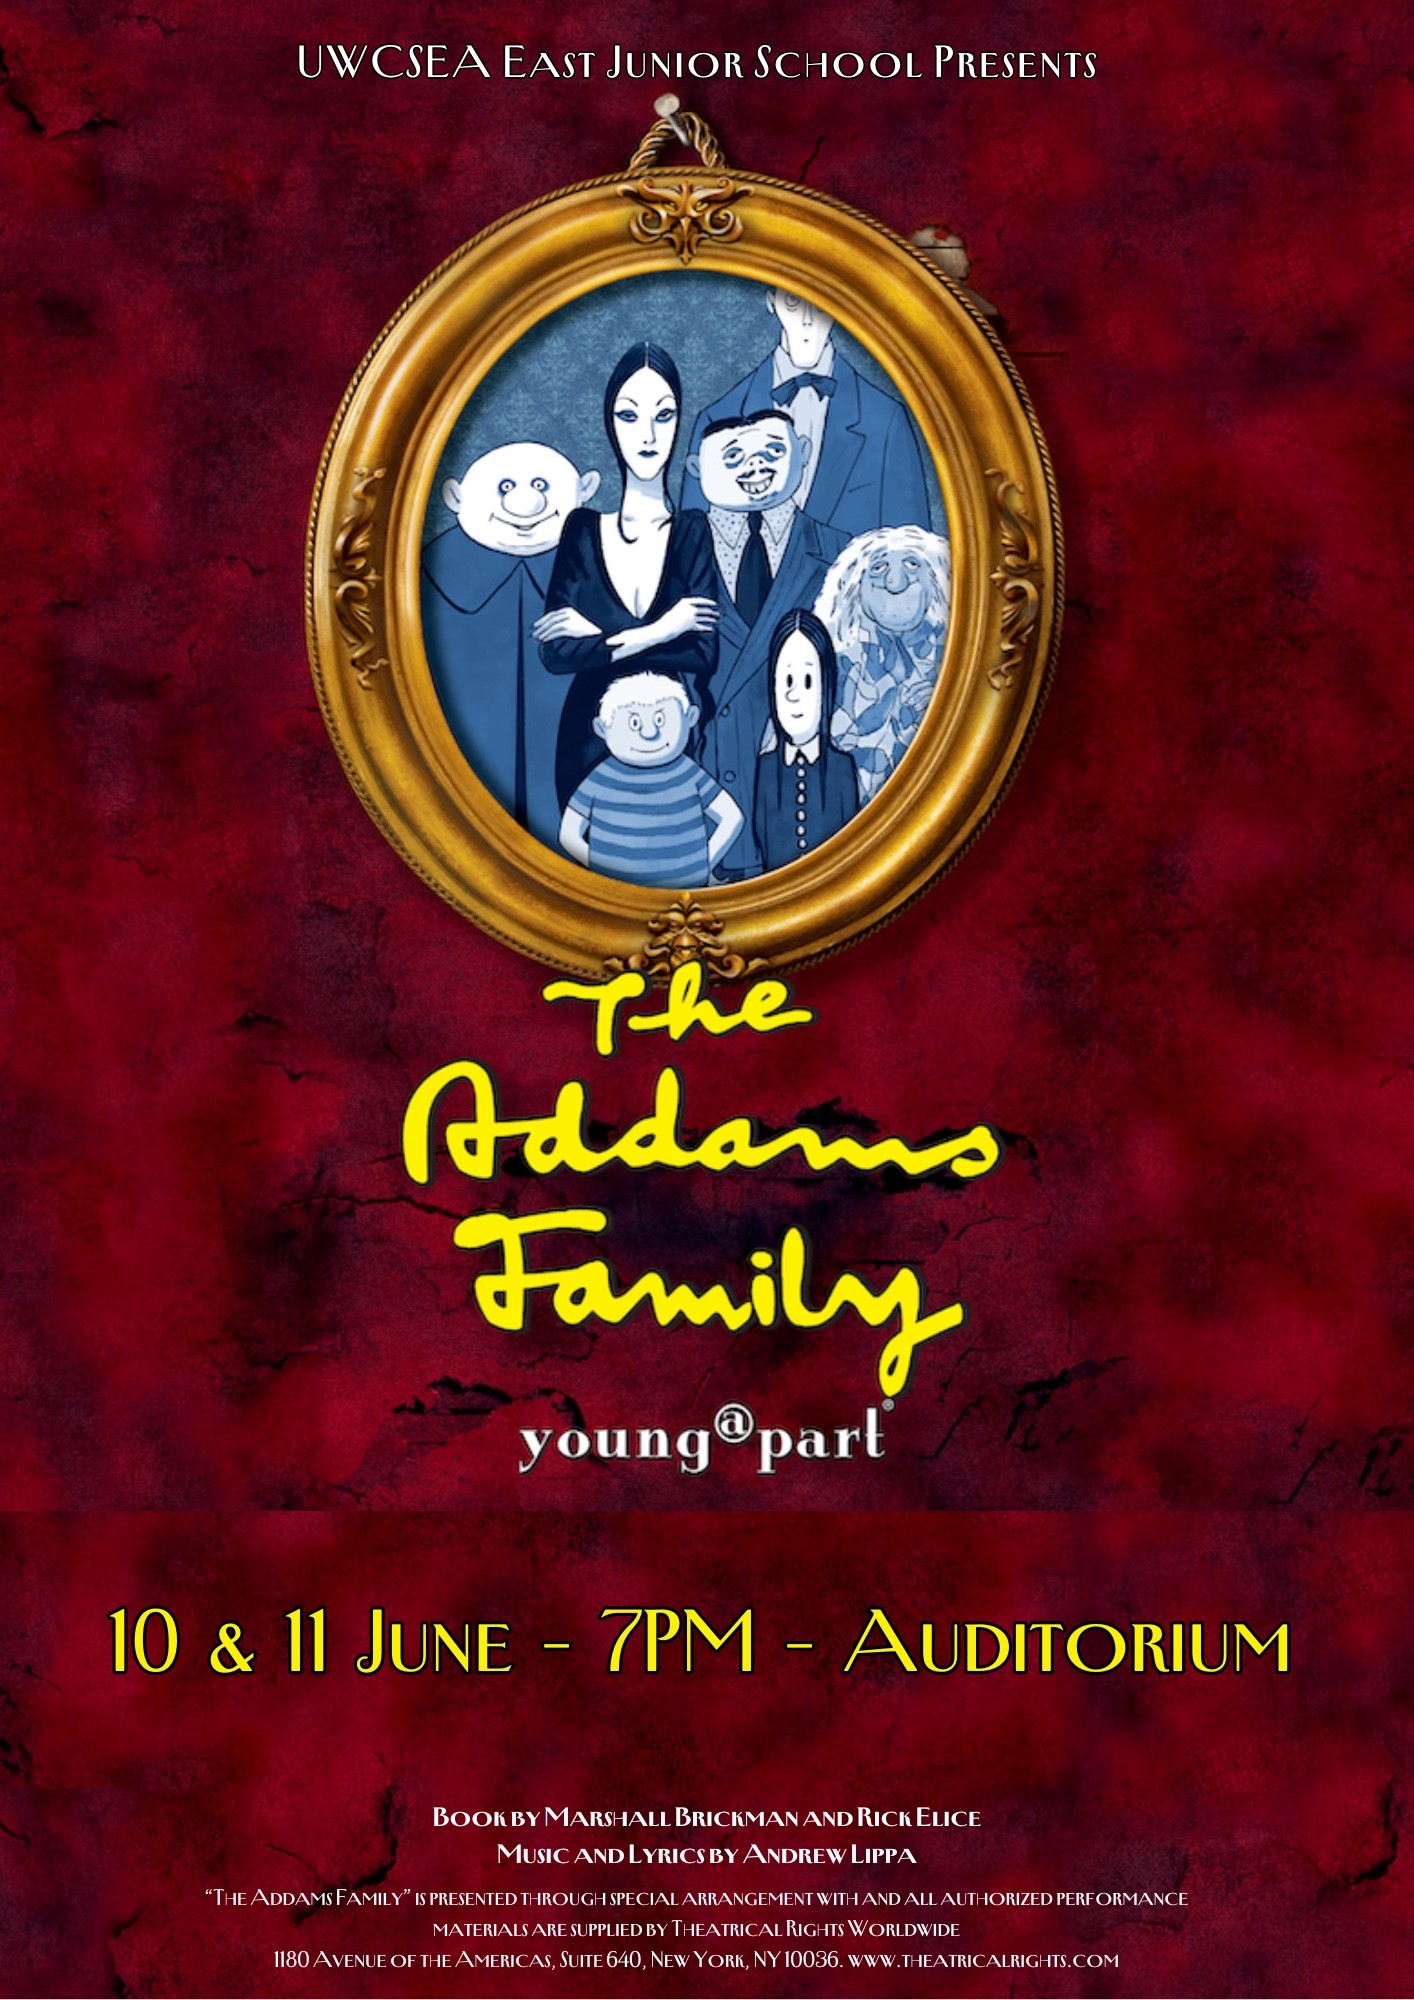 The Addams Family (Show 1) JS Musical (PG00000013-2023/24) on Jun 10, 19:00@UWCSEA East Auditorium - Pick a seat, Buy tickets and Get information on UWCSEA Ticket Hub uwcsea